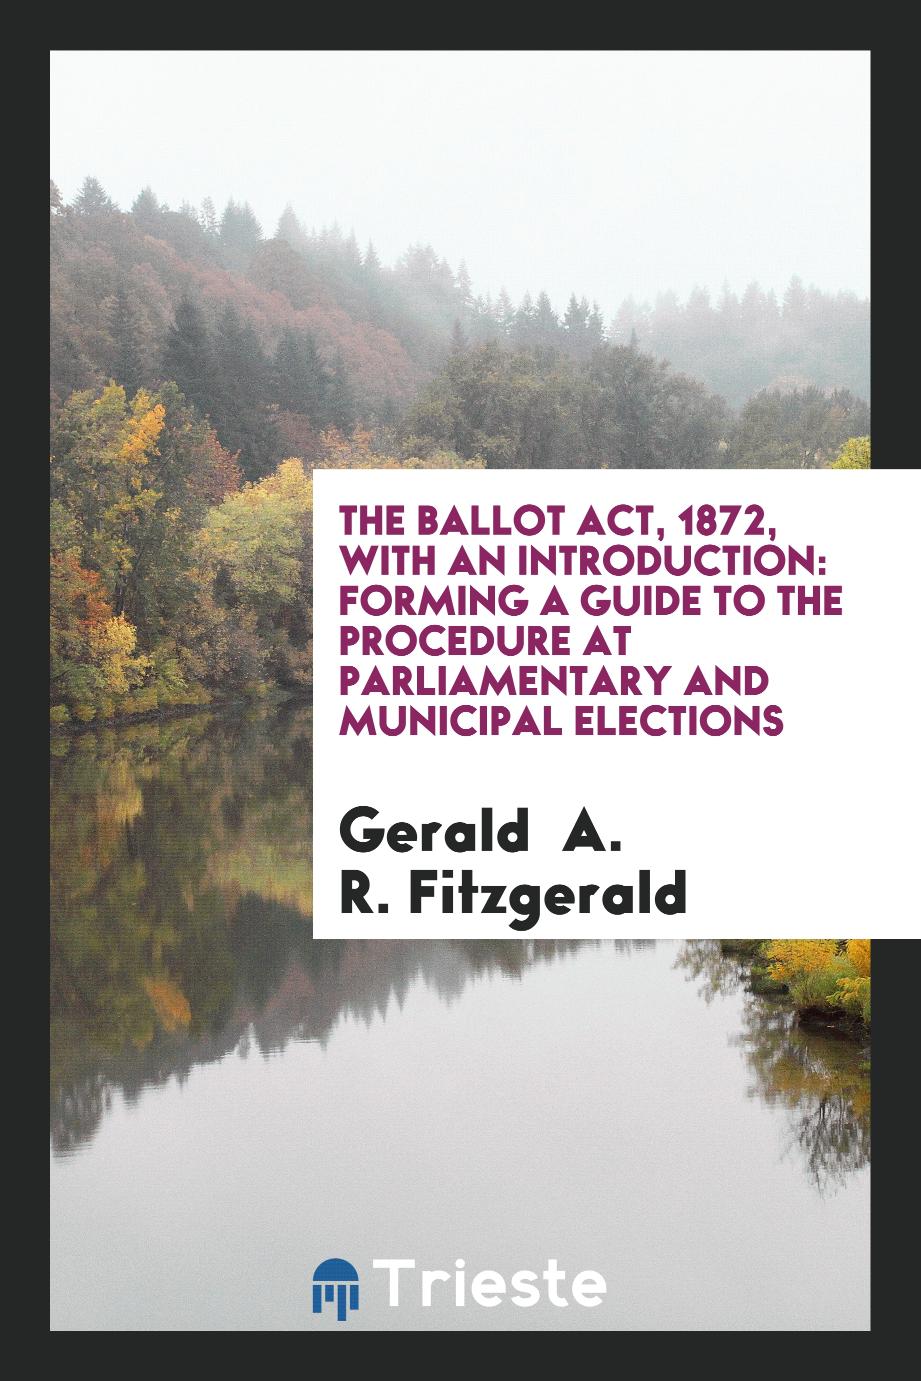 The Ballot Act, 1872, with an Introduction: Forming a Guide to the Procedure at Parliamentary and Municipal Elections